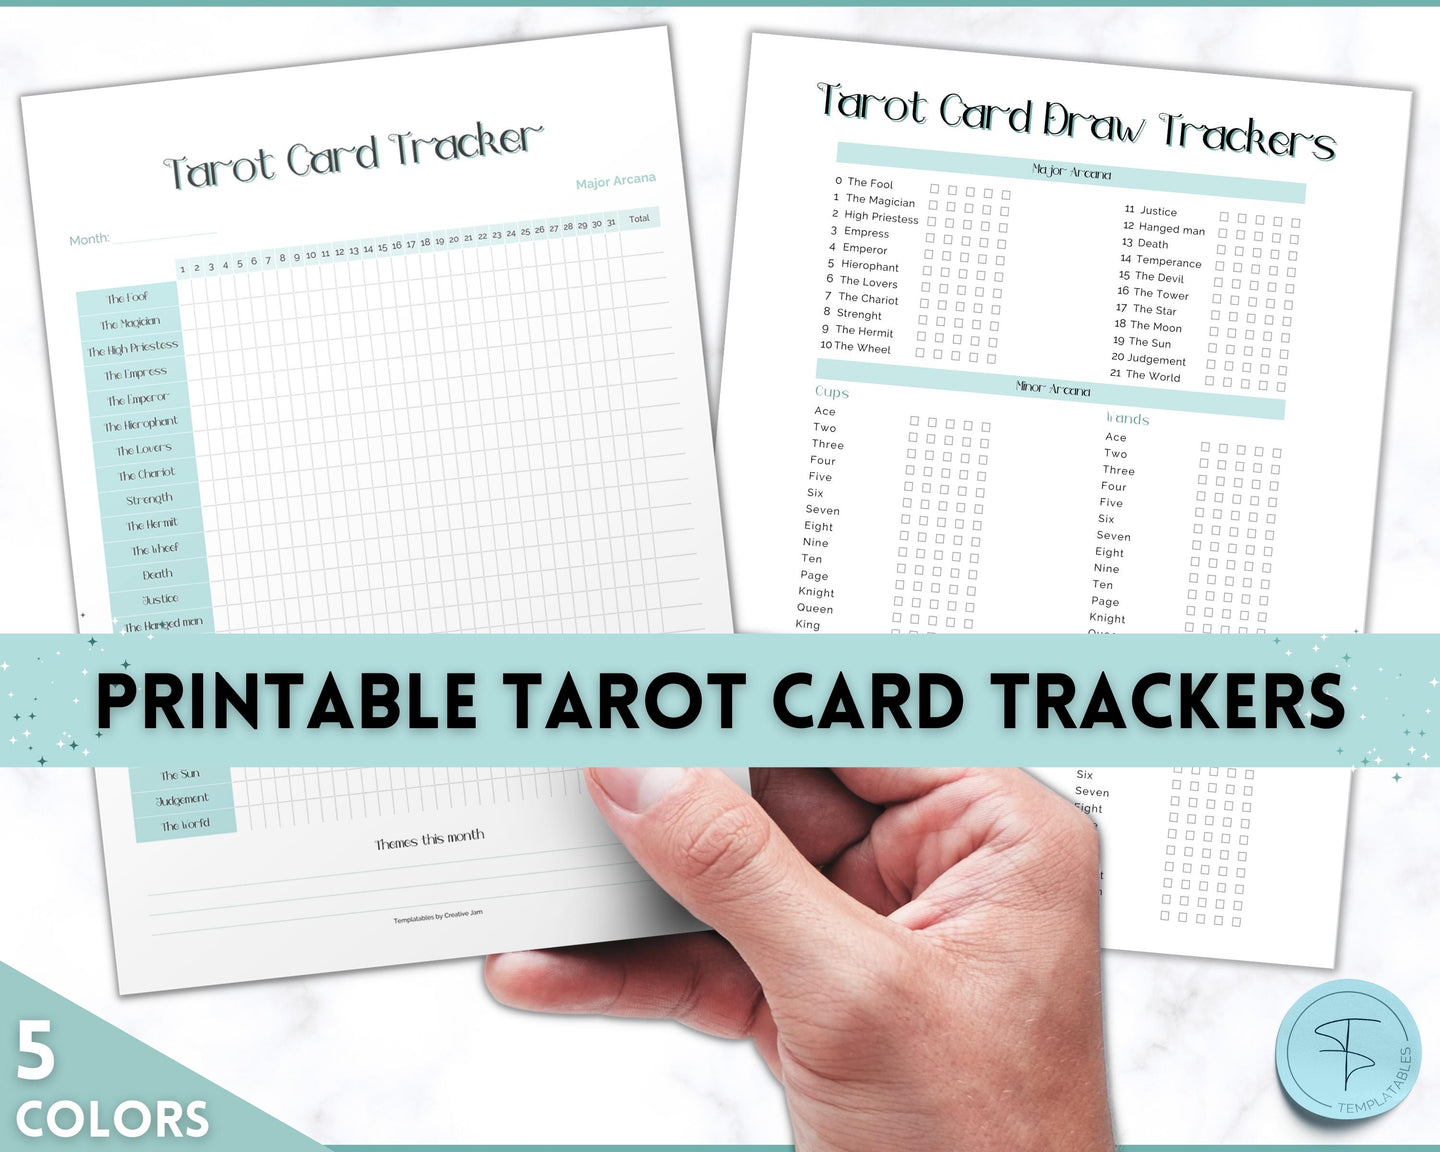 Tarot Card Trackers & Monthly Readings | Learn Tarot Card Readings, Tarot Spreads | Beginner Tarot Planner Workbook, Grimoire & Cheat Sheets | Blue